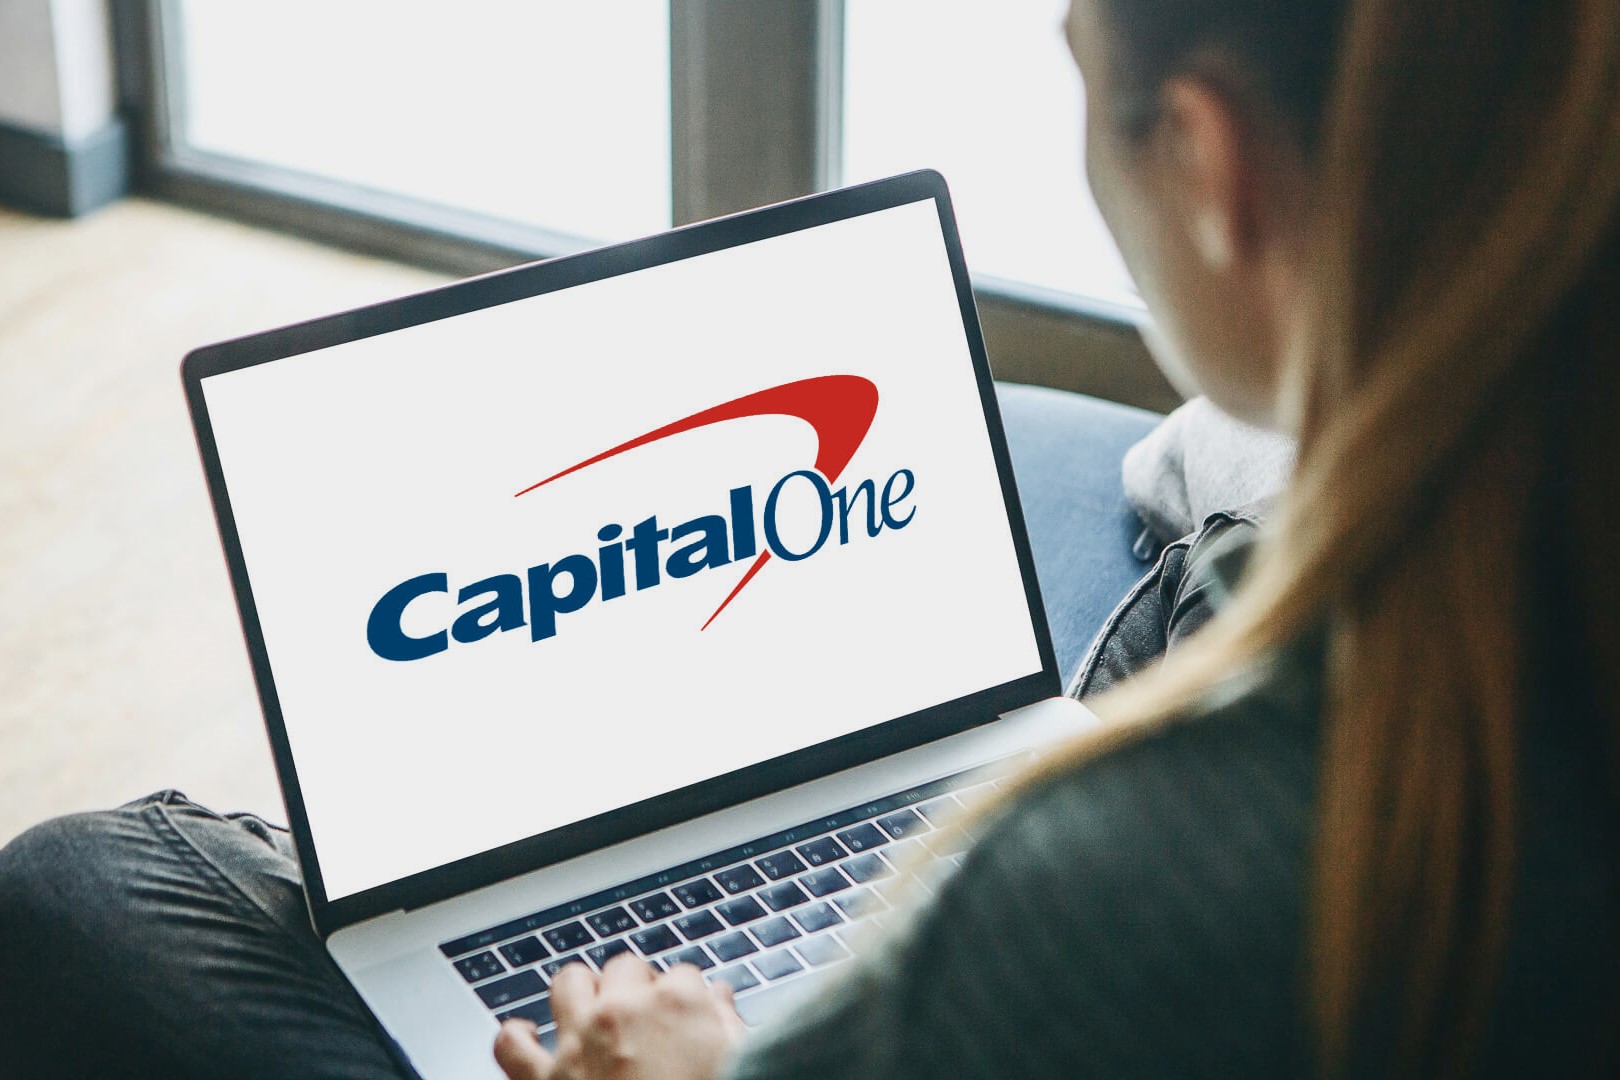 Unlock The Full Potential Of Your Capital One Account With These Simple Steps